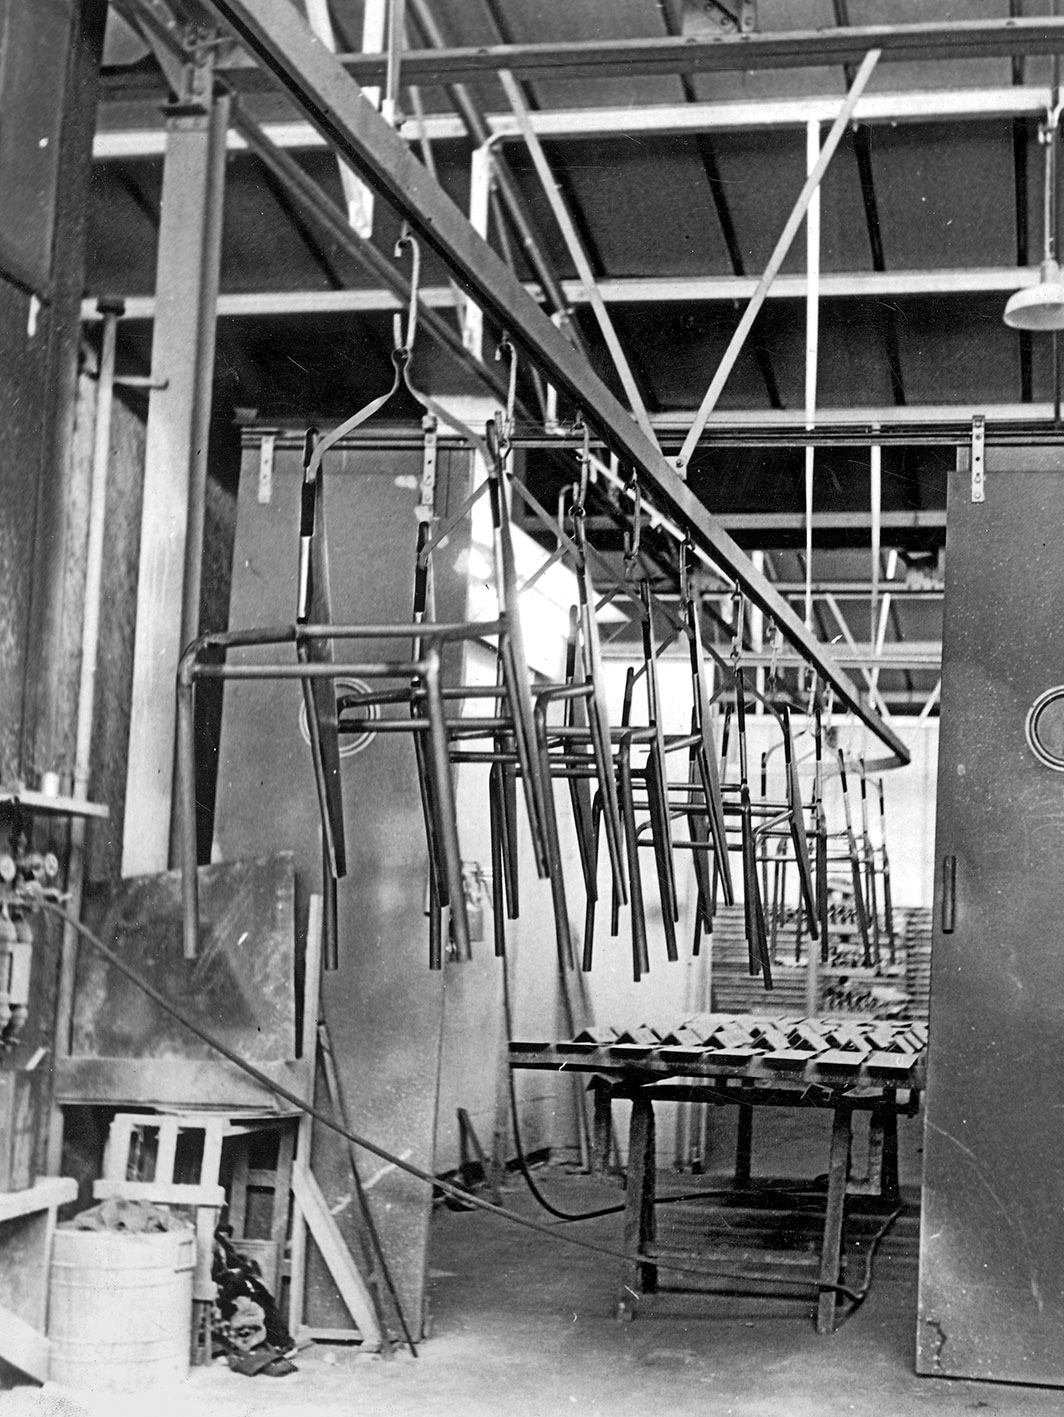 Ateliers Jean Prouvé, Maxéville. Structures of the Métropole no. 305 chair prepared to be painted, ca. 1952.